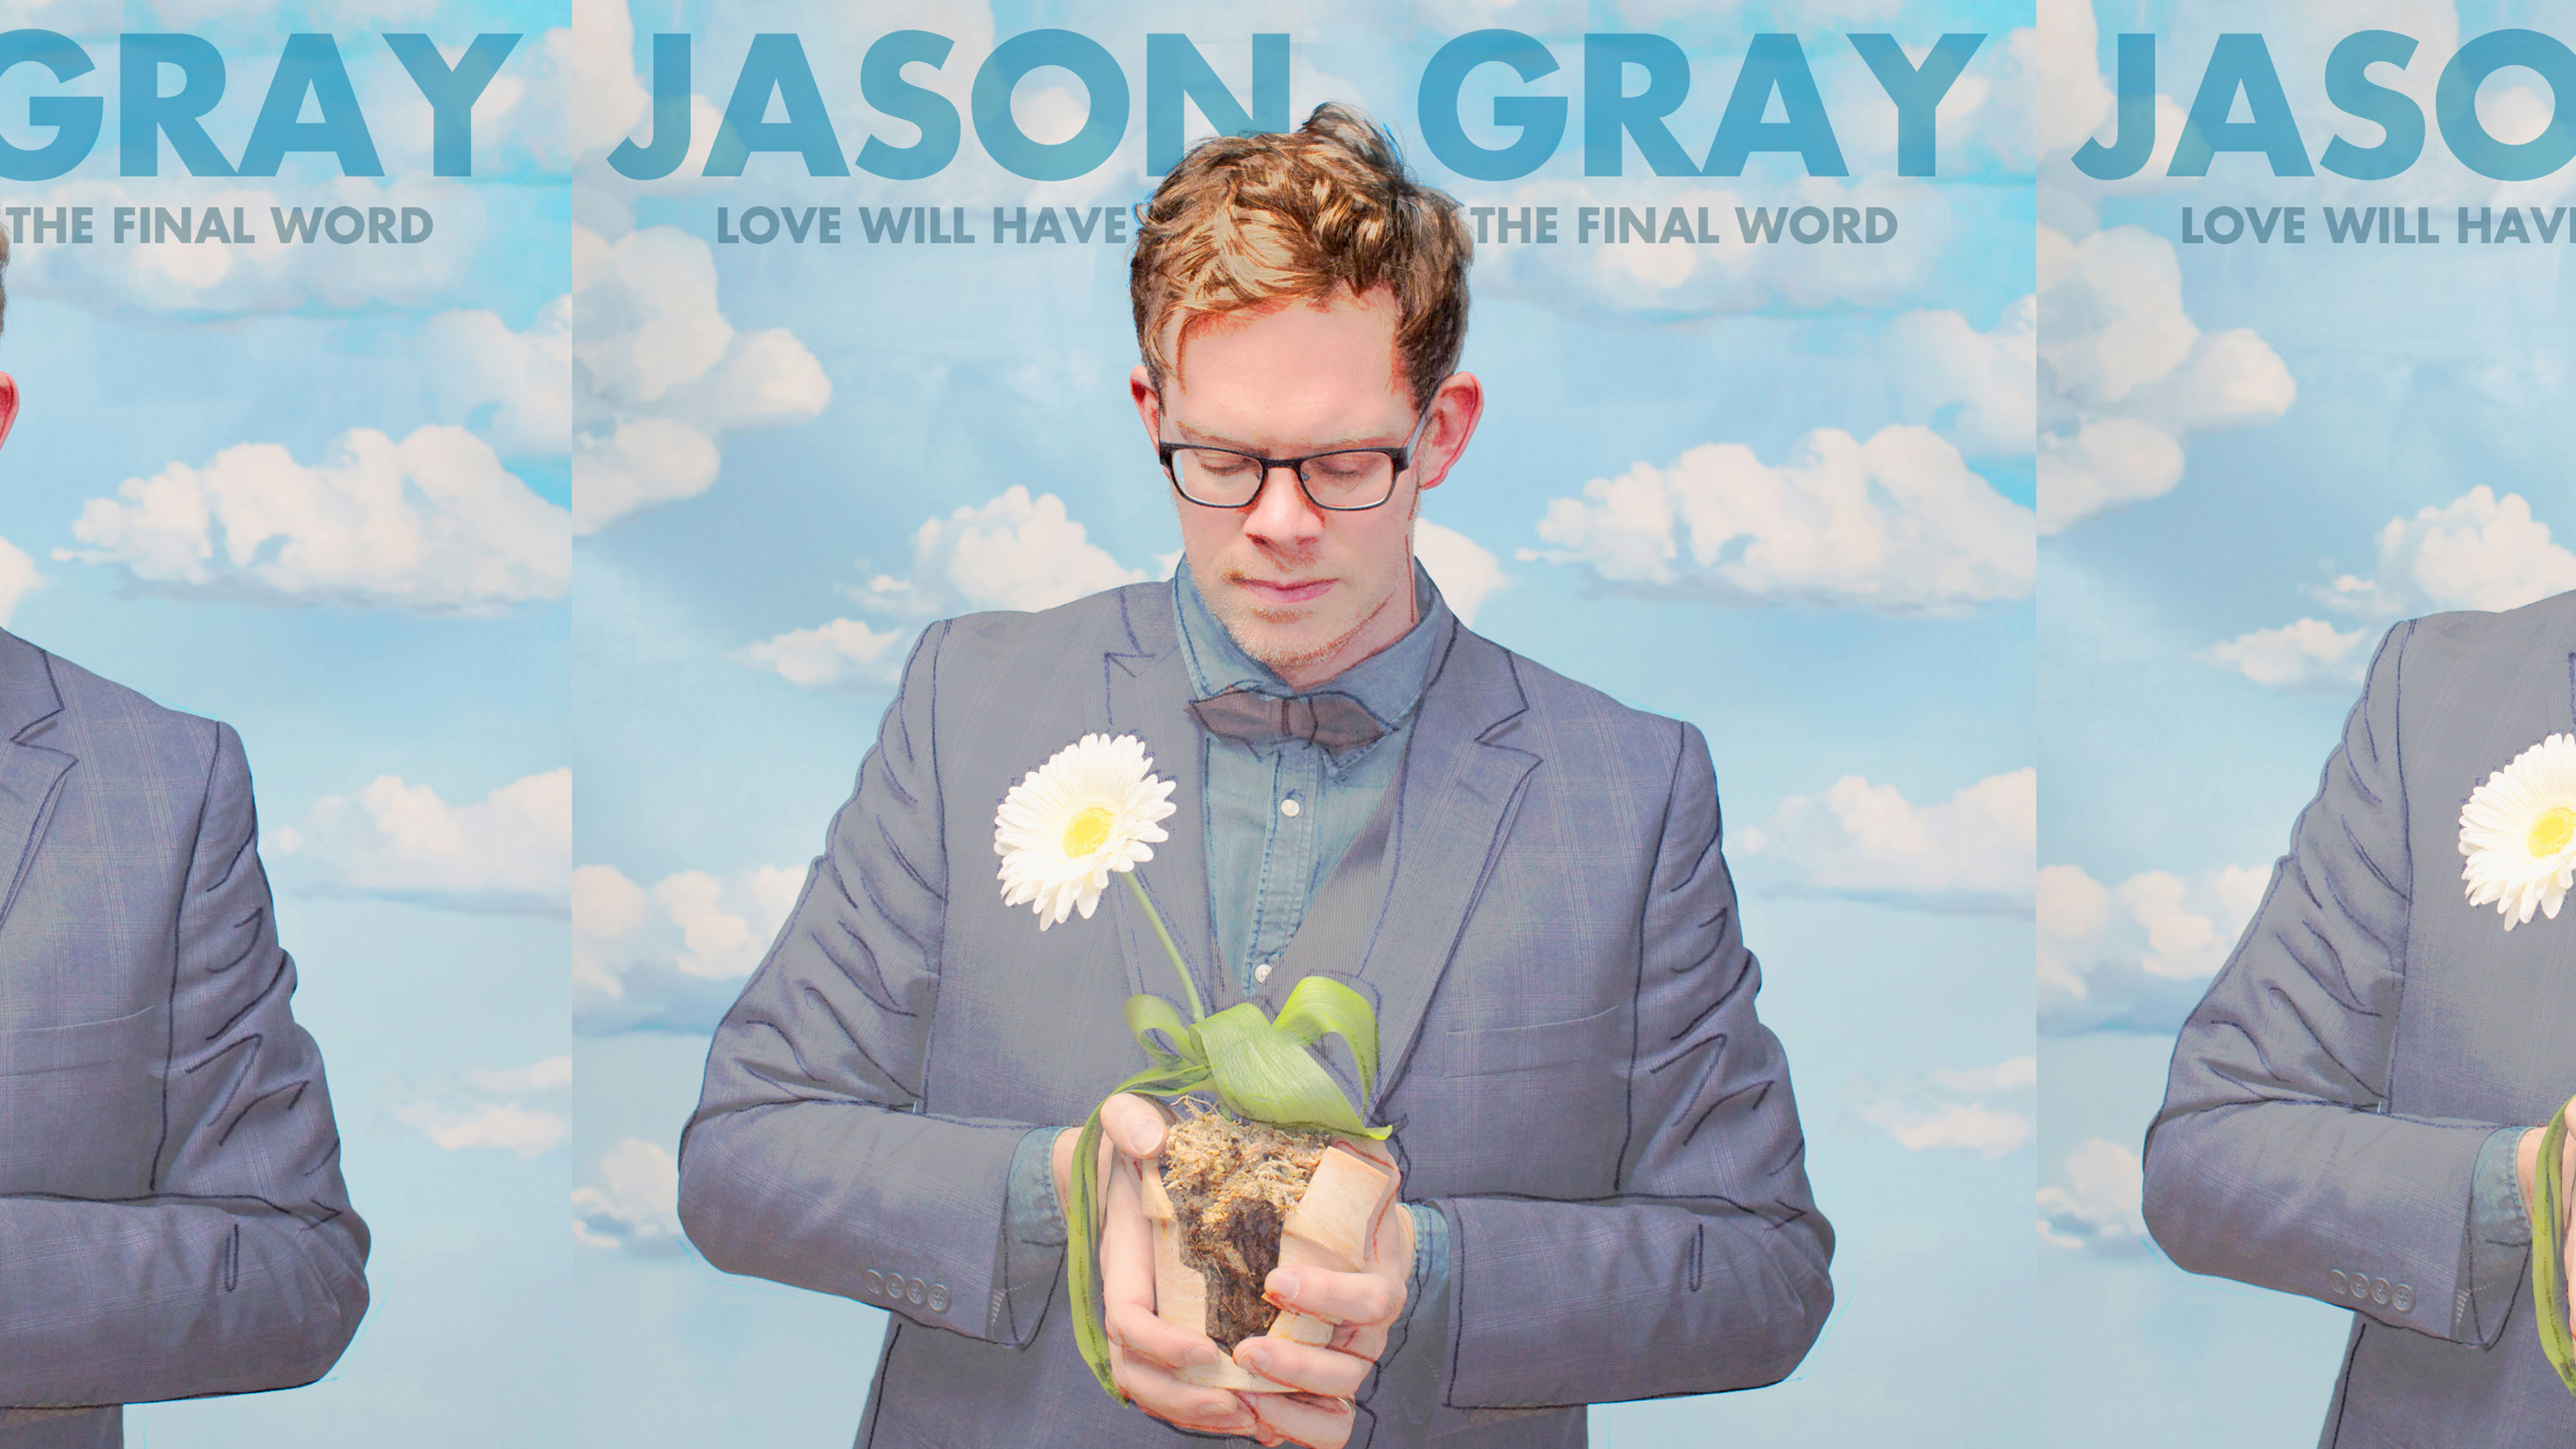 Jason Gray – Love Will Have The Final Word